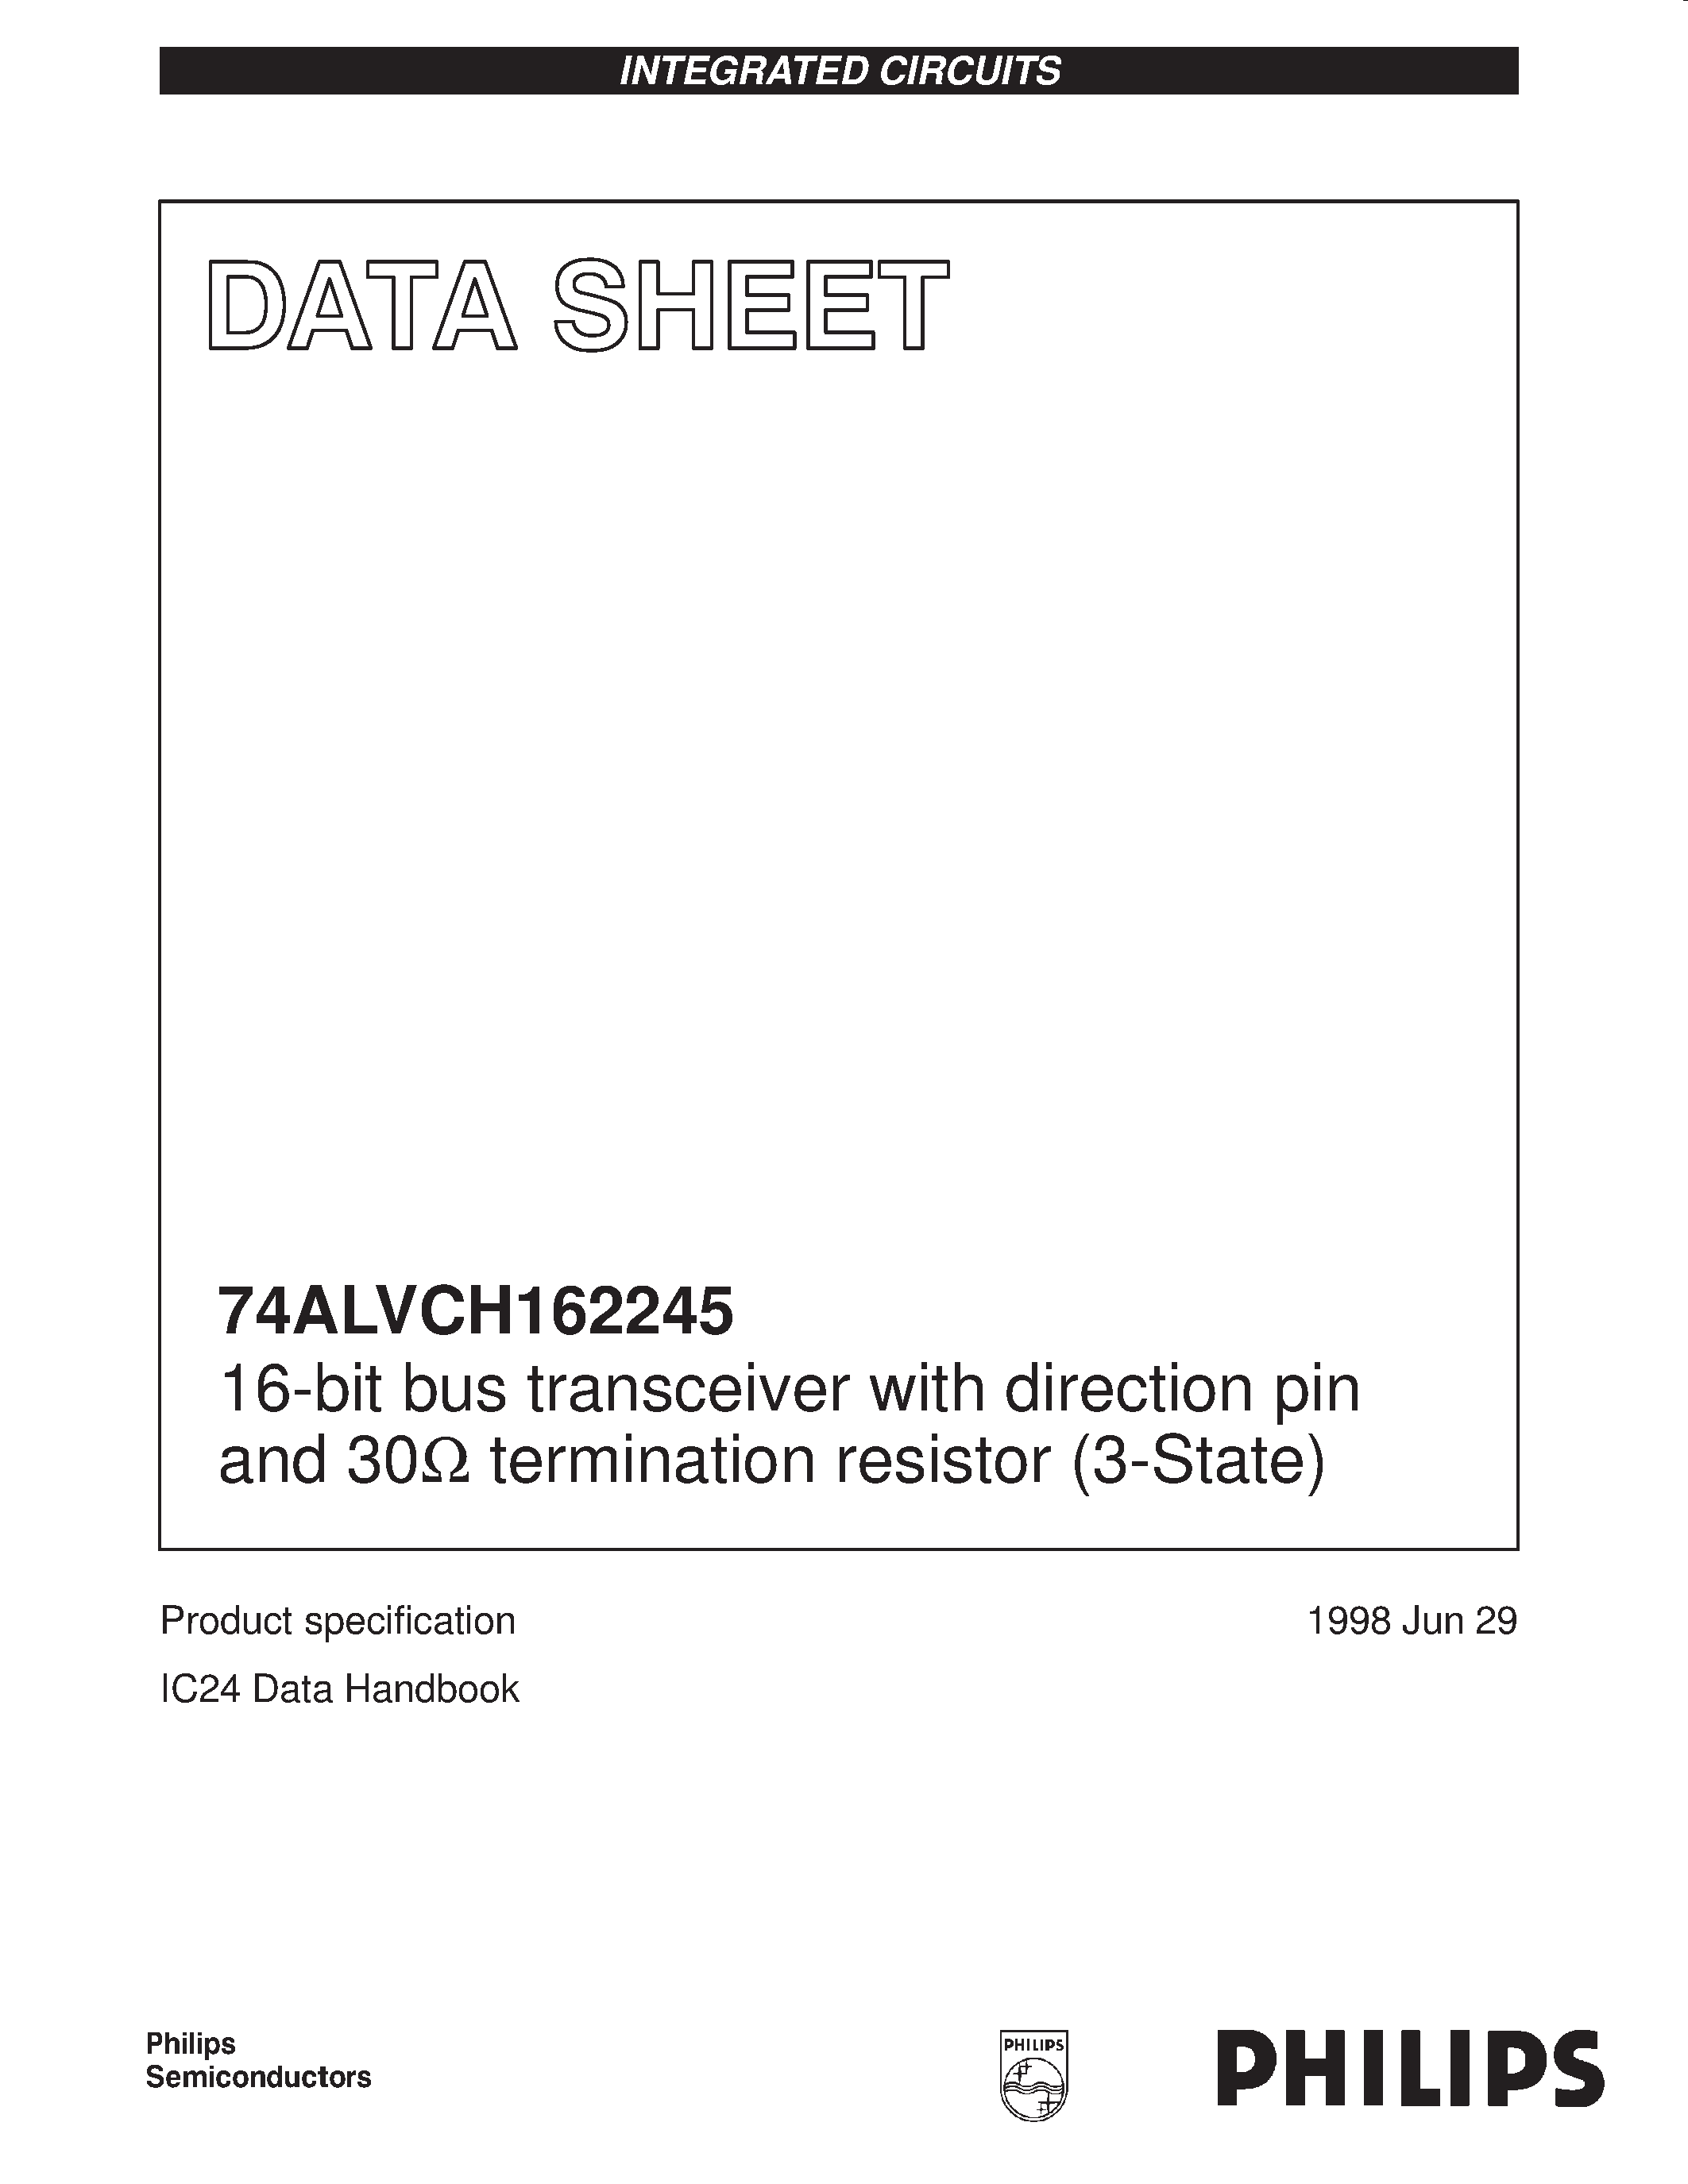 Даташит 74ALVCH162245DGG - 16-bit bus transceiver with direction pin and 30ohm termination resistor 3-State страница 1